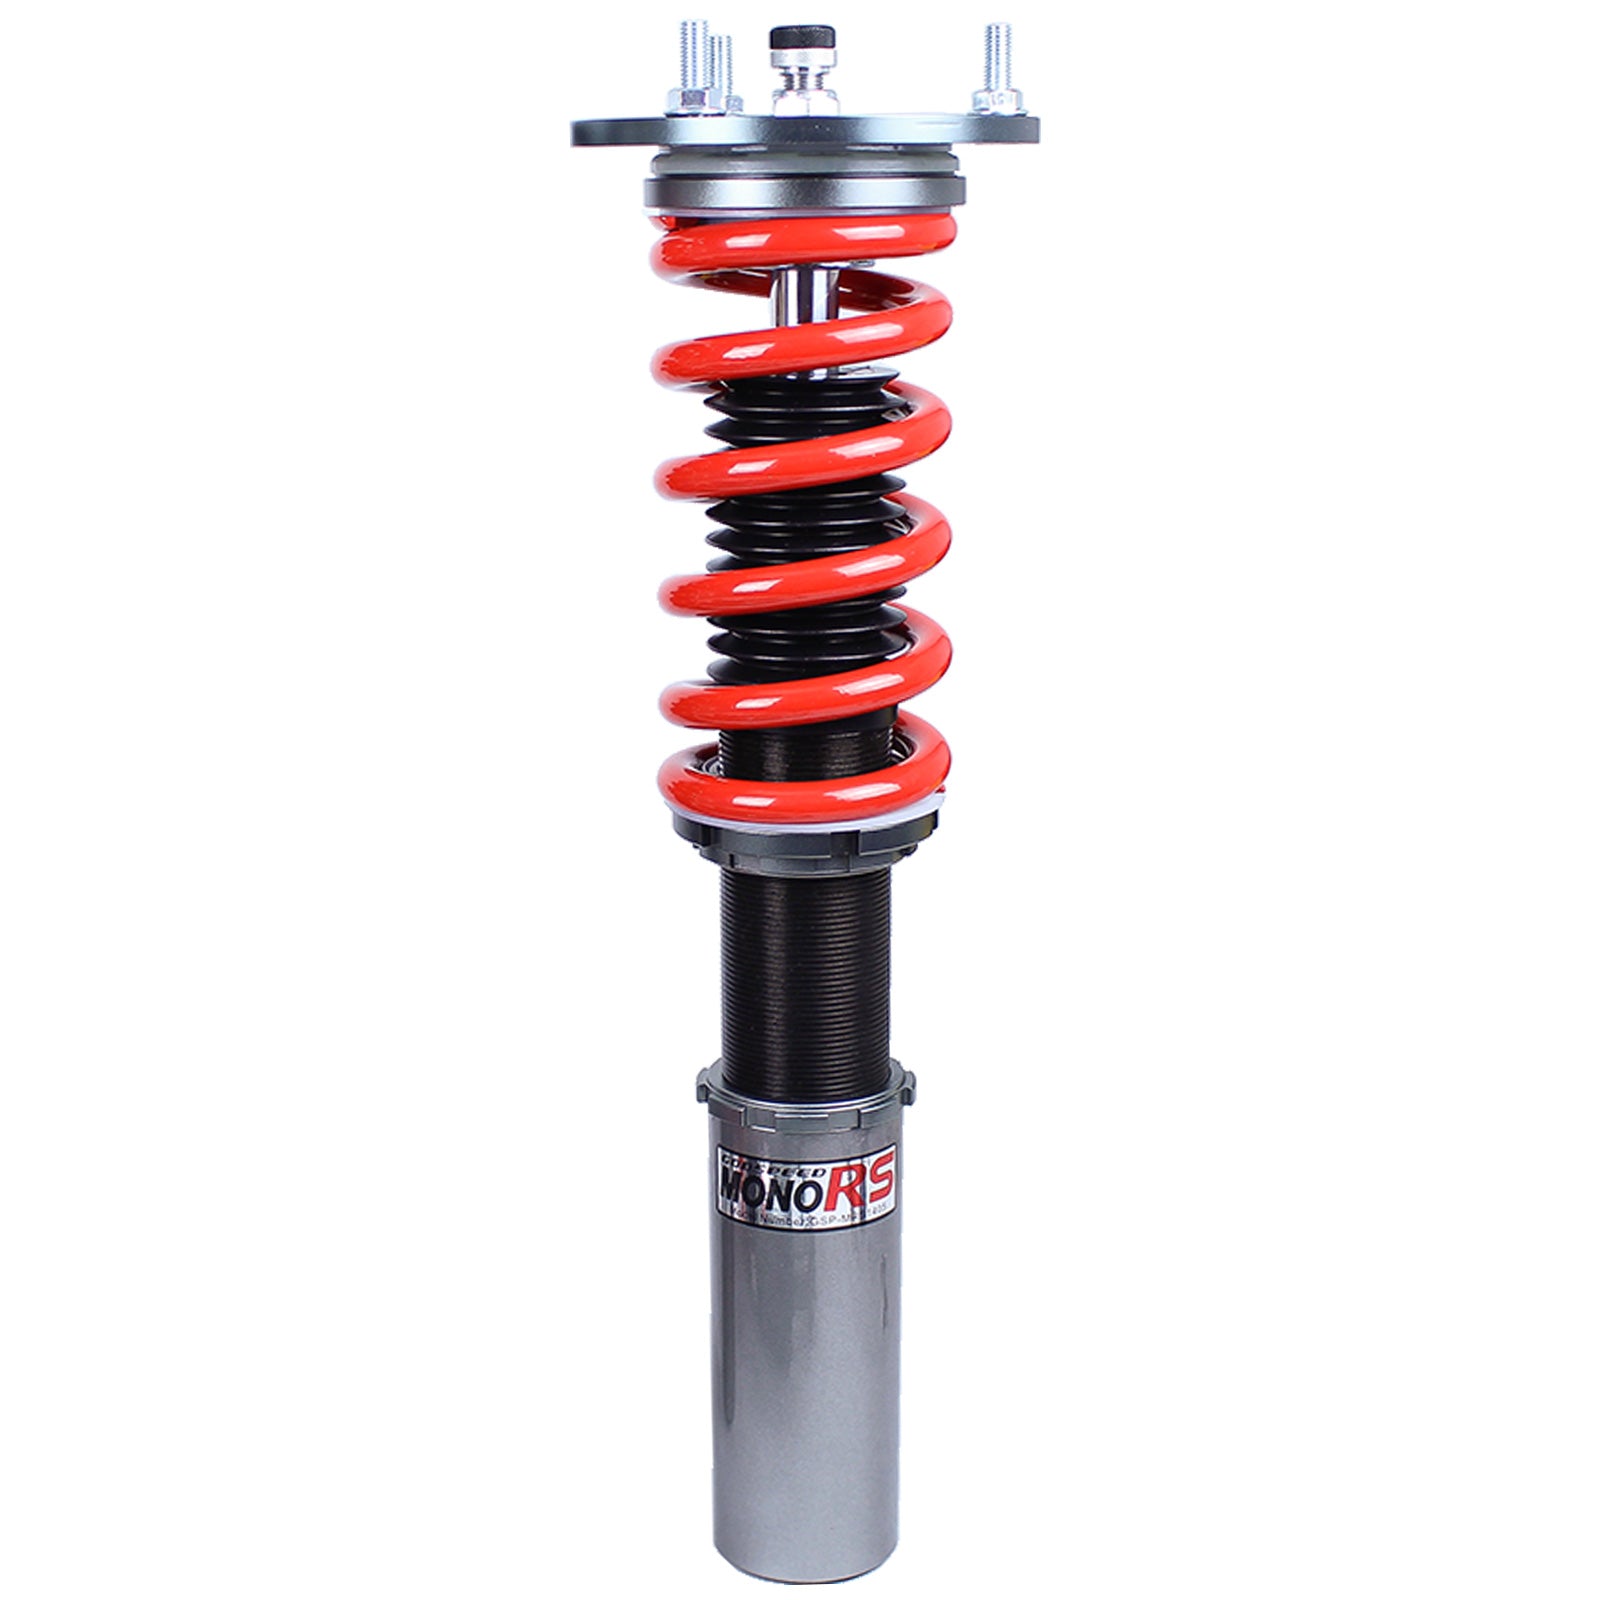 Godspeed MRS1405 MonoRS Coilover Lowering Kit, 32 Damping Adjustment, Ride Height Adjustable